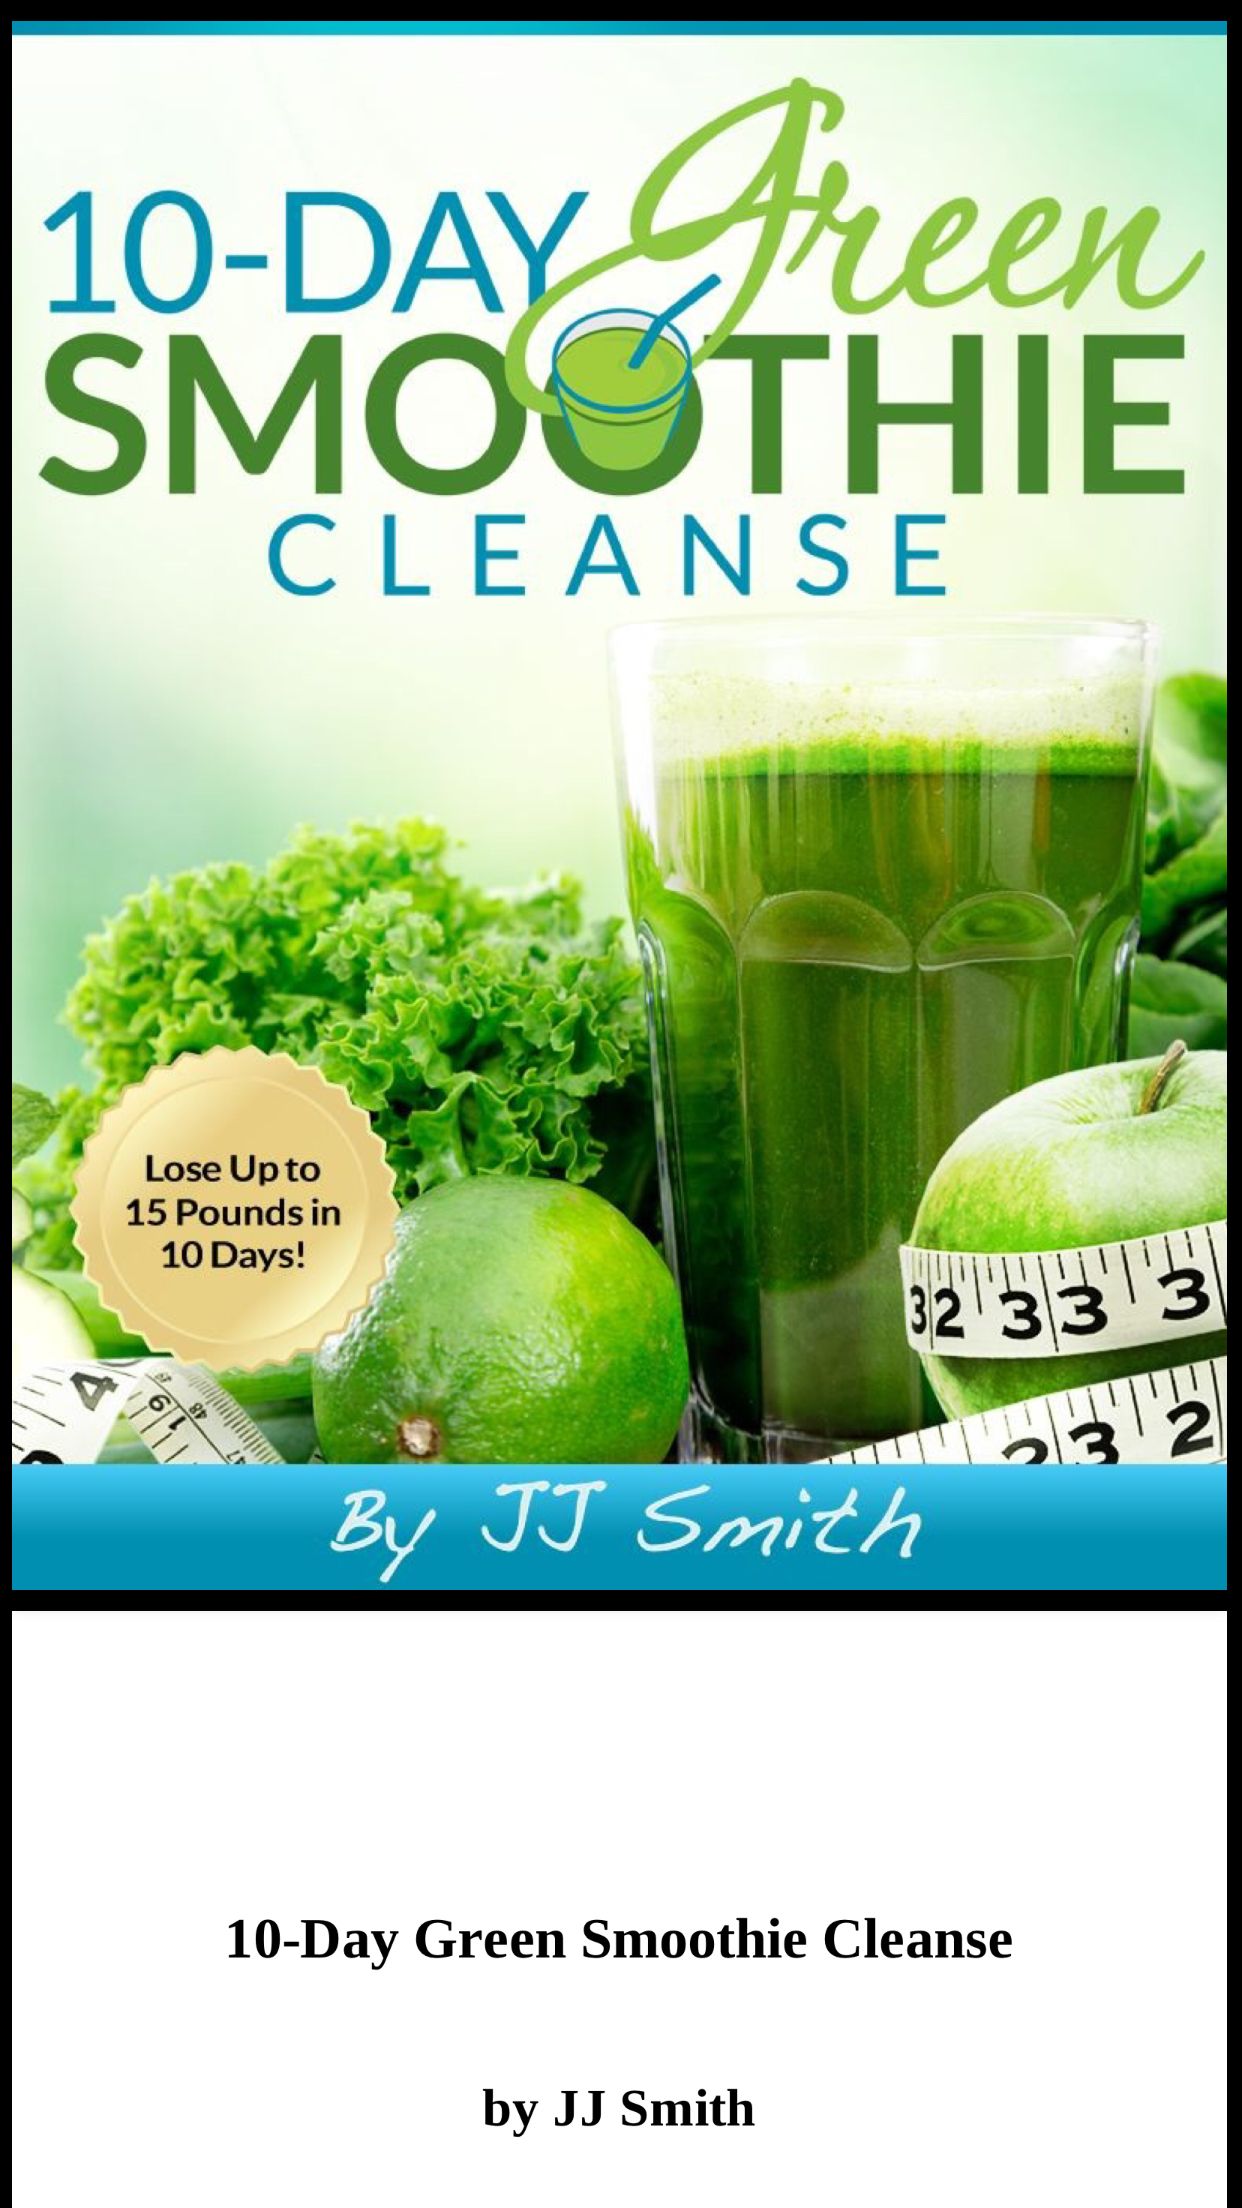 10 Day Greene Smoothie Cleanse